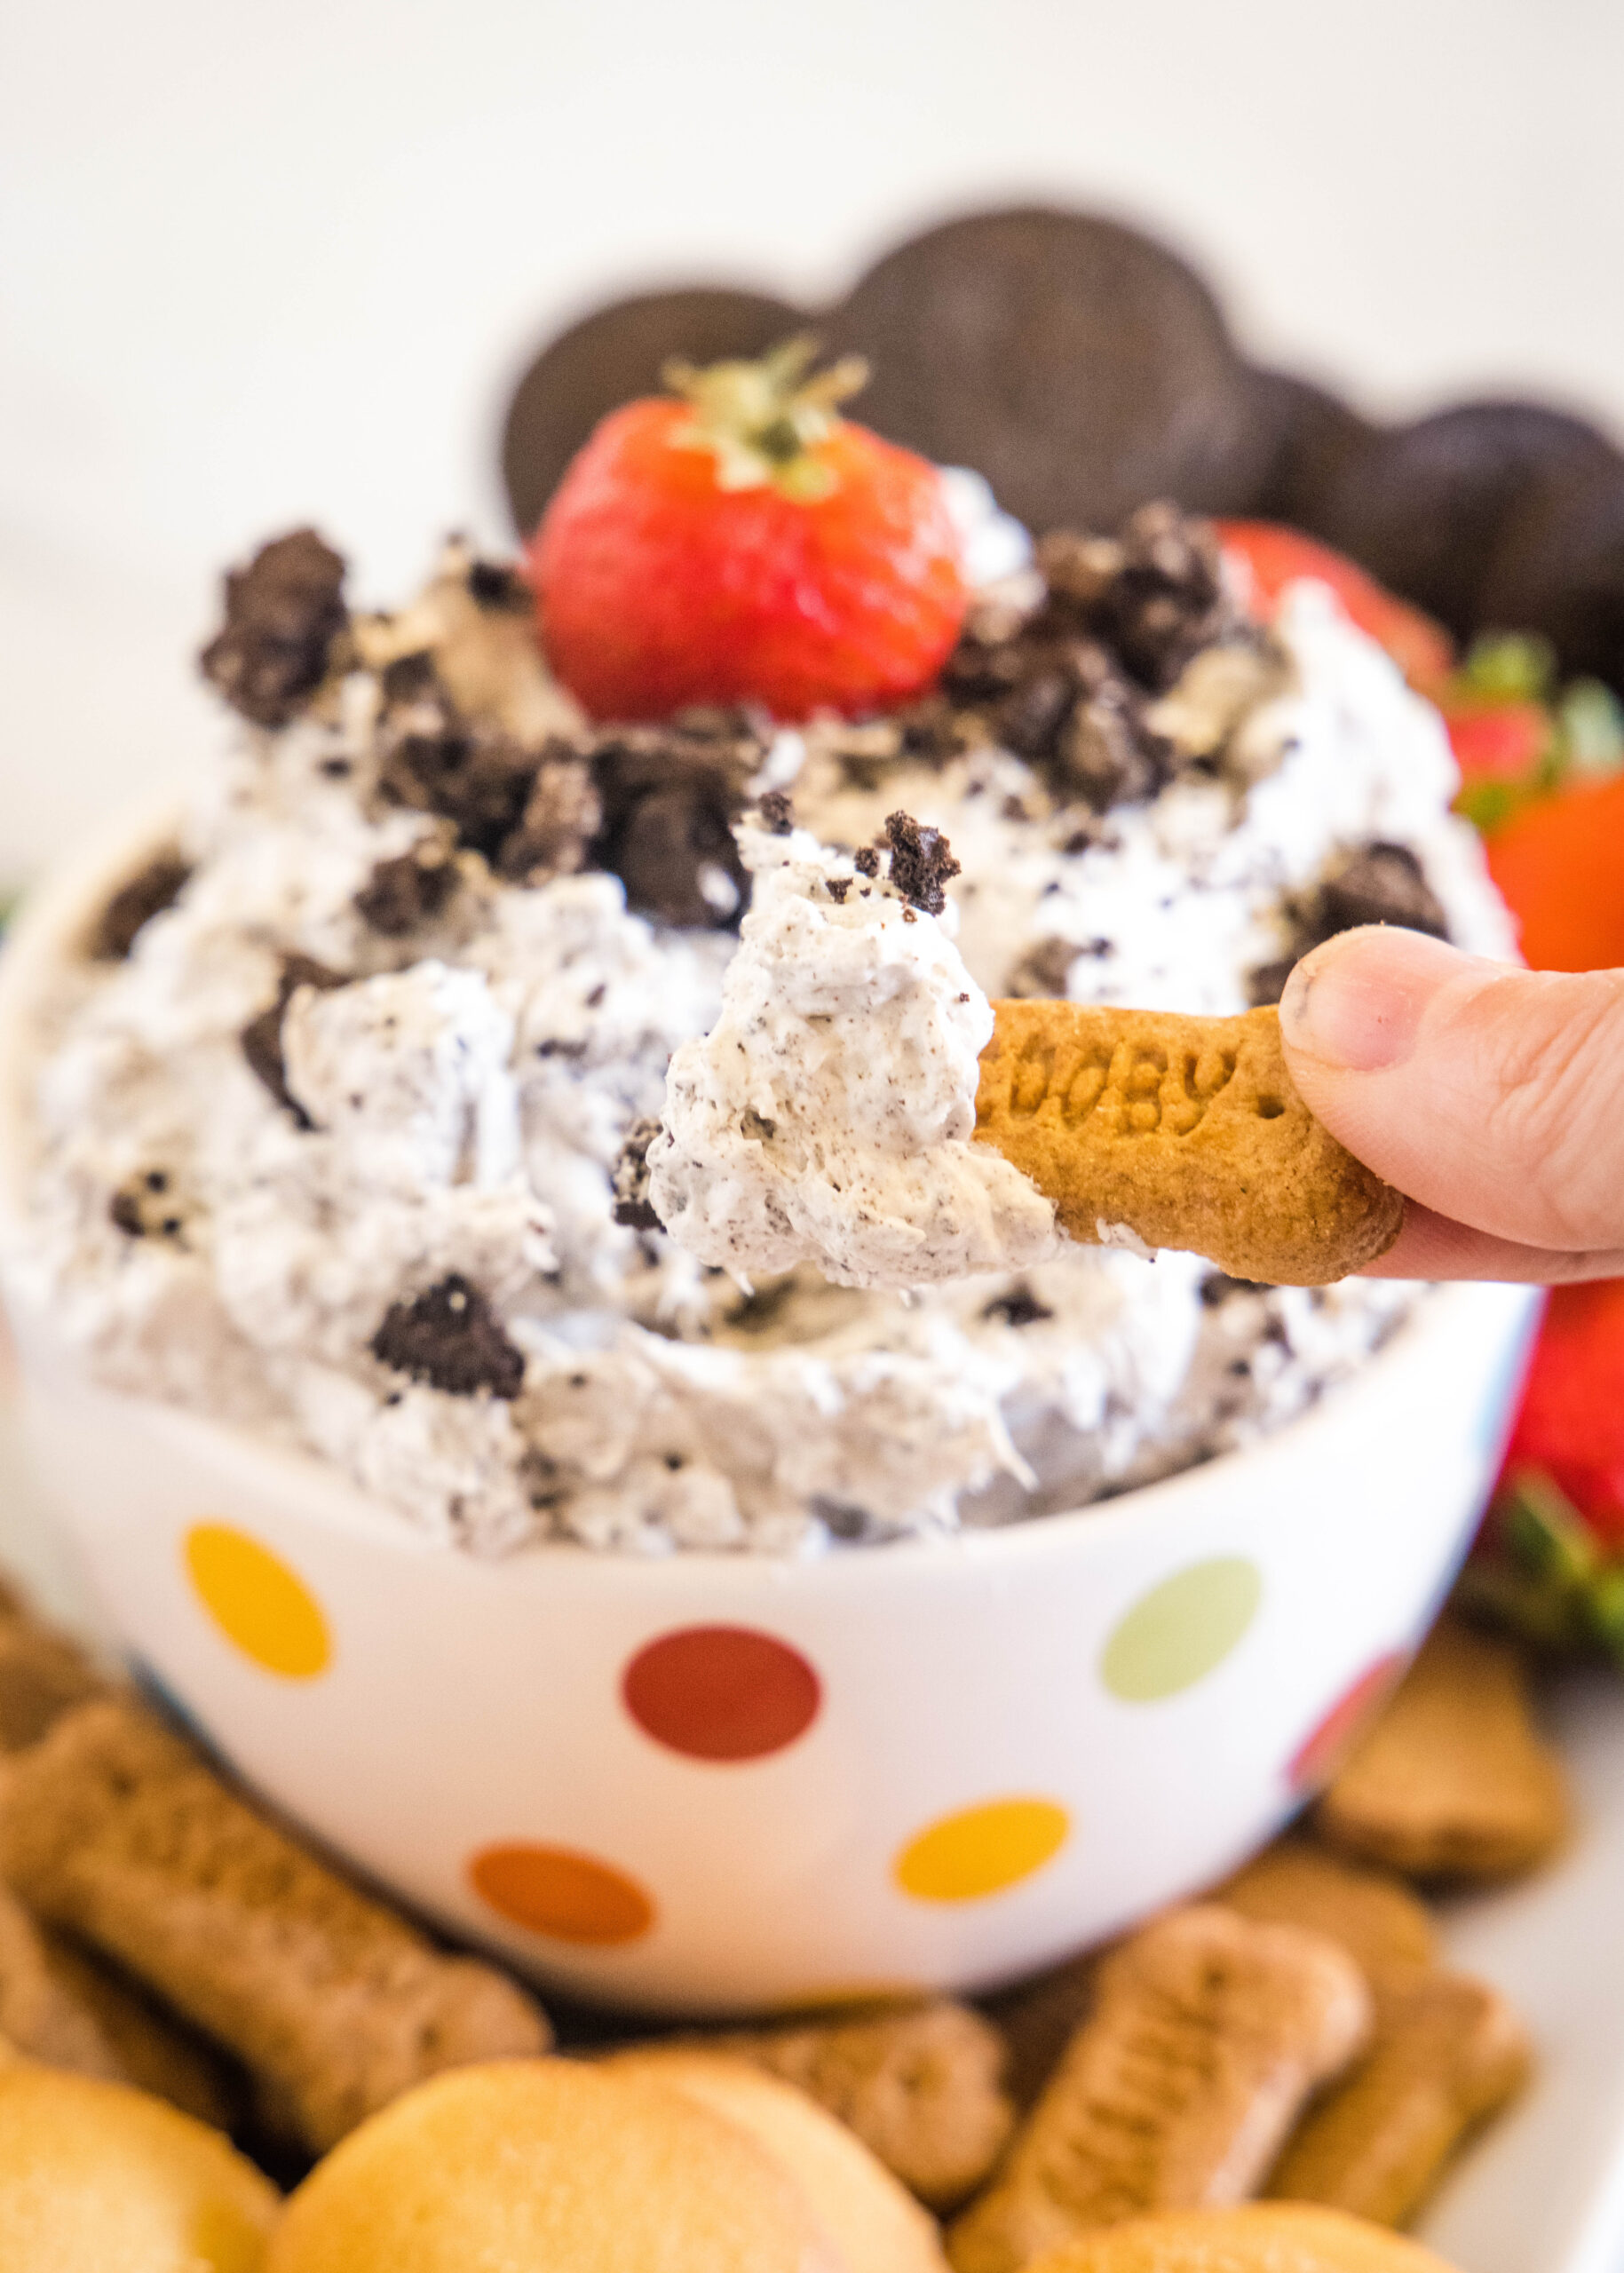 A hand dipping a cookie into a bowl of Oreo fluff.